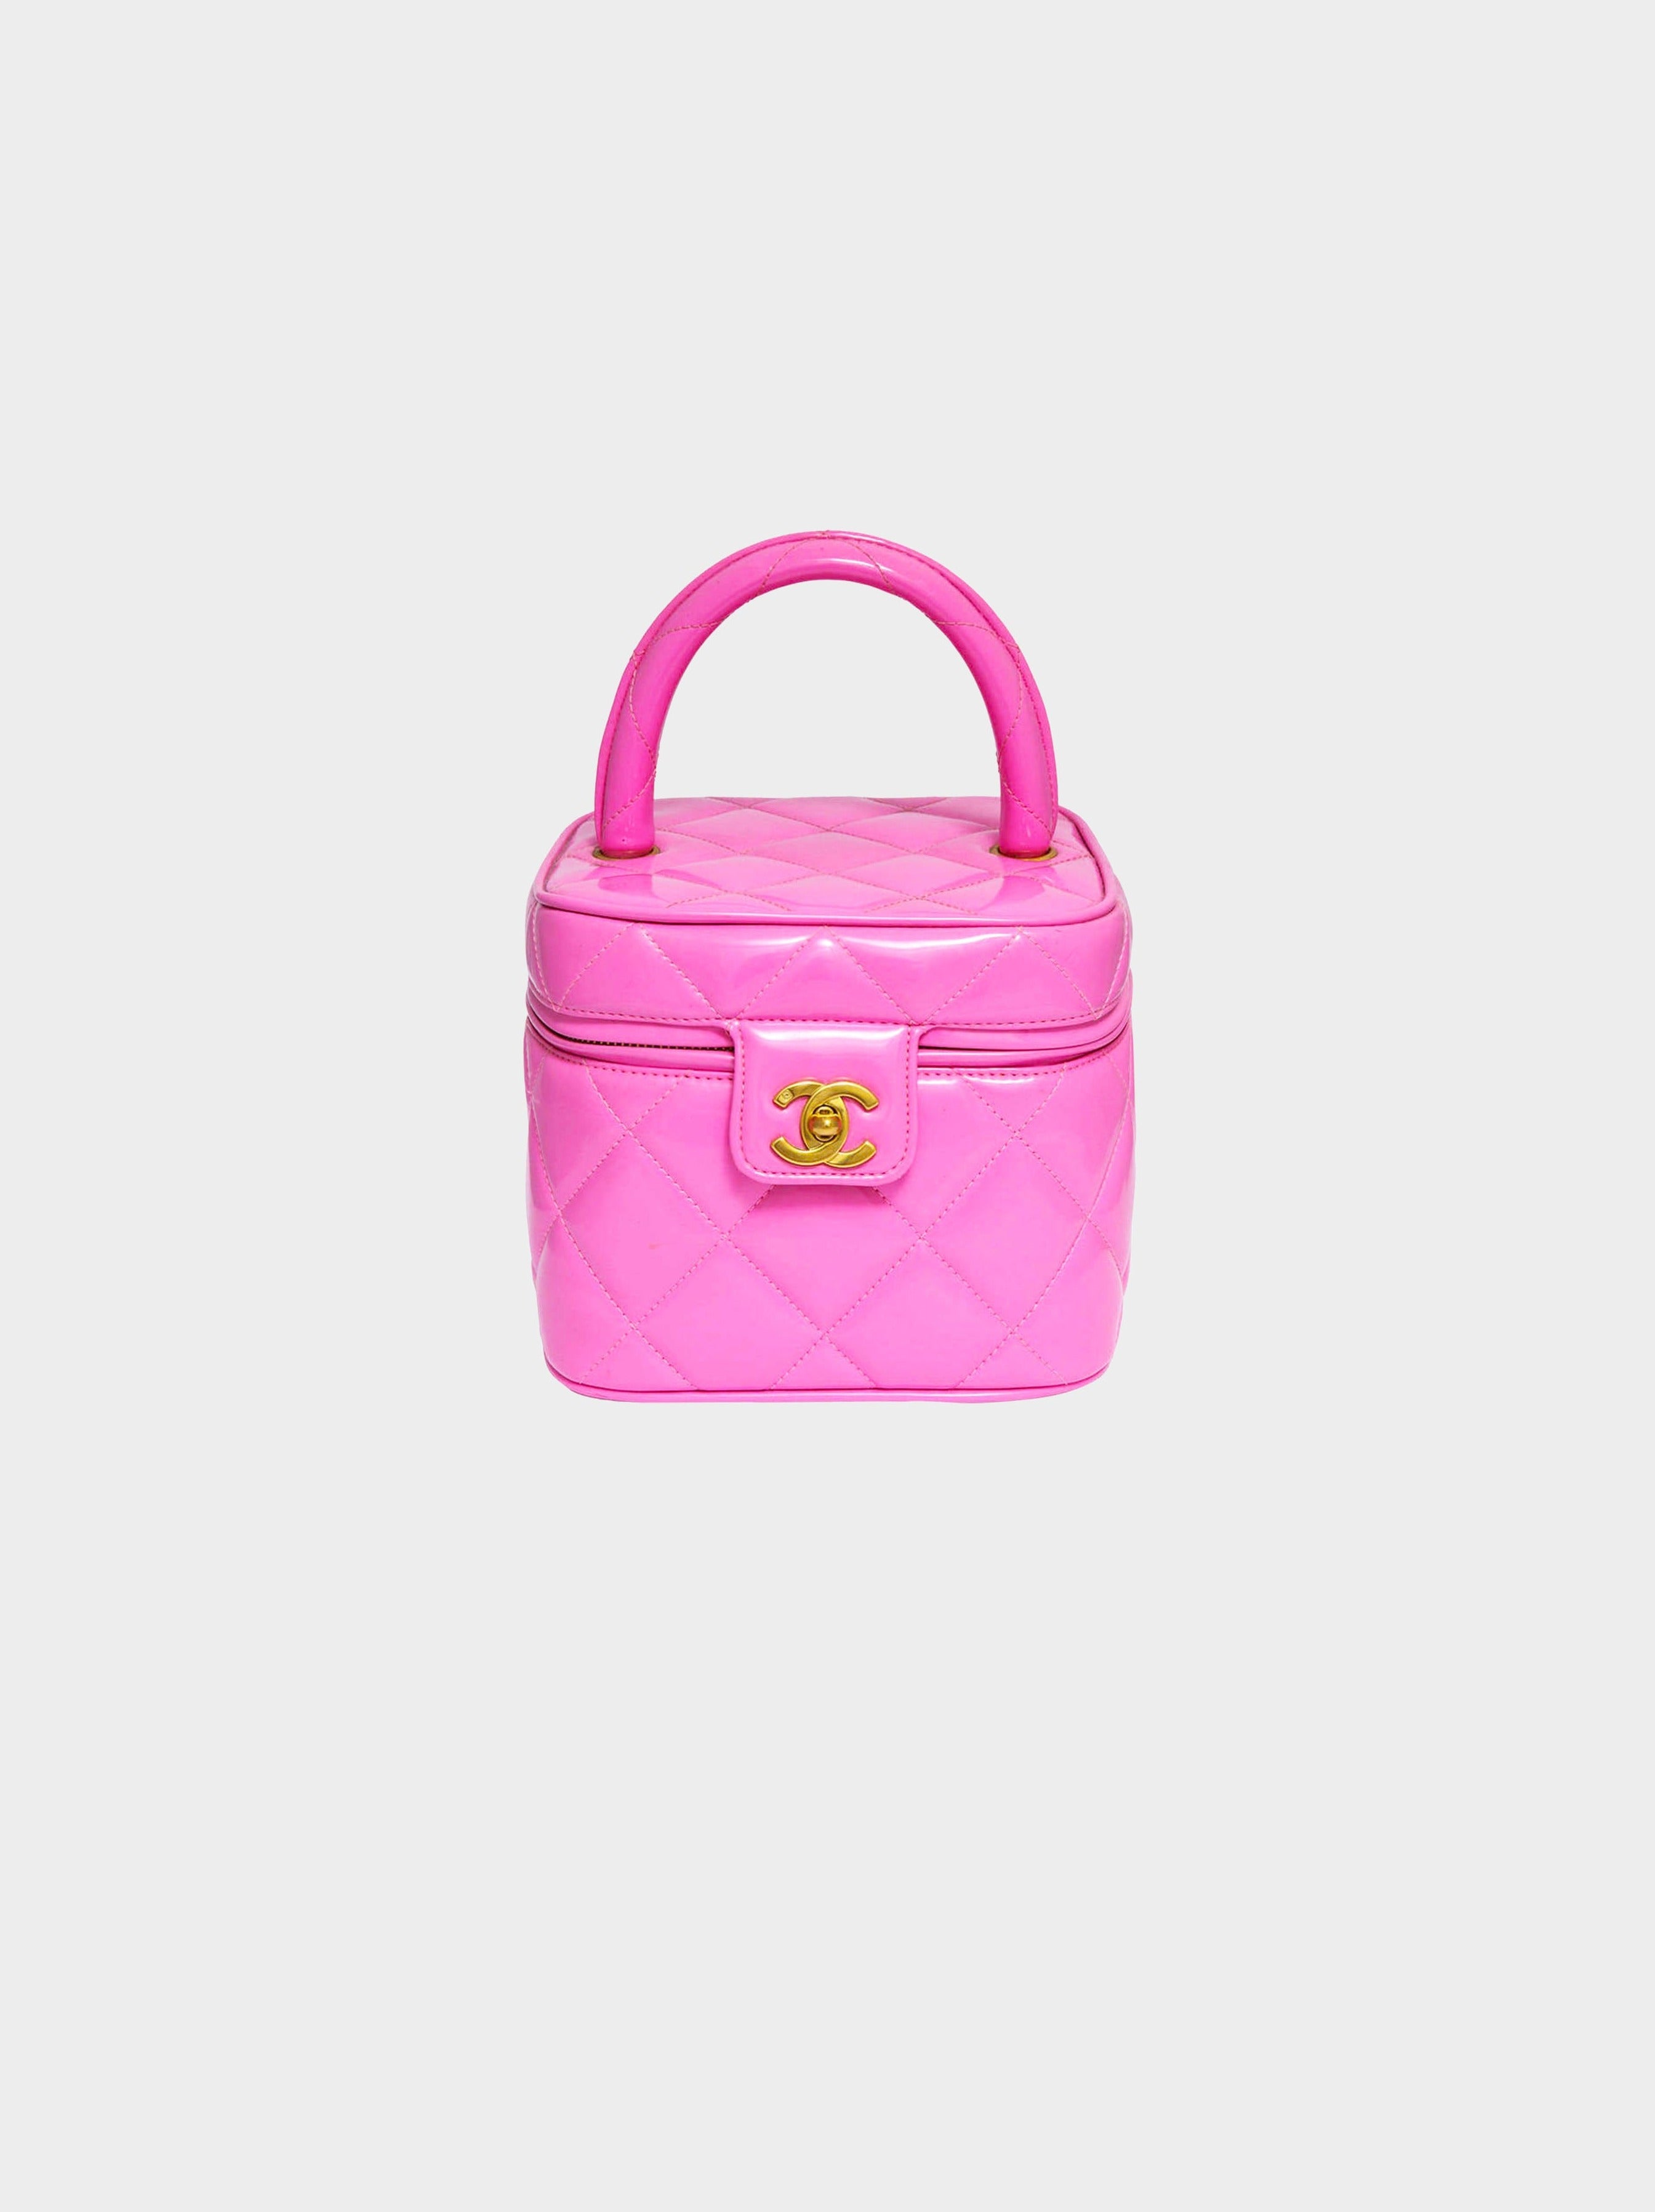 Chanel SS 1995 Rare Pink Heart Vanity Case · INTO